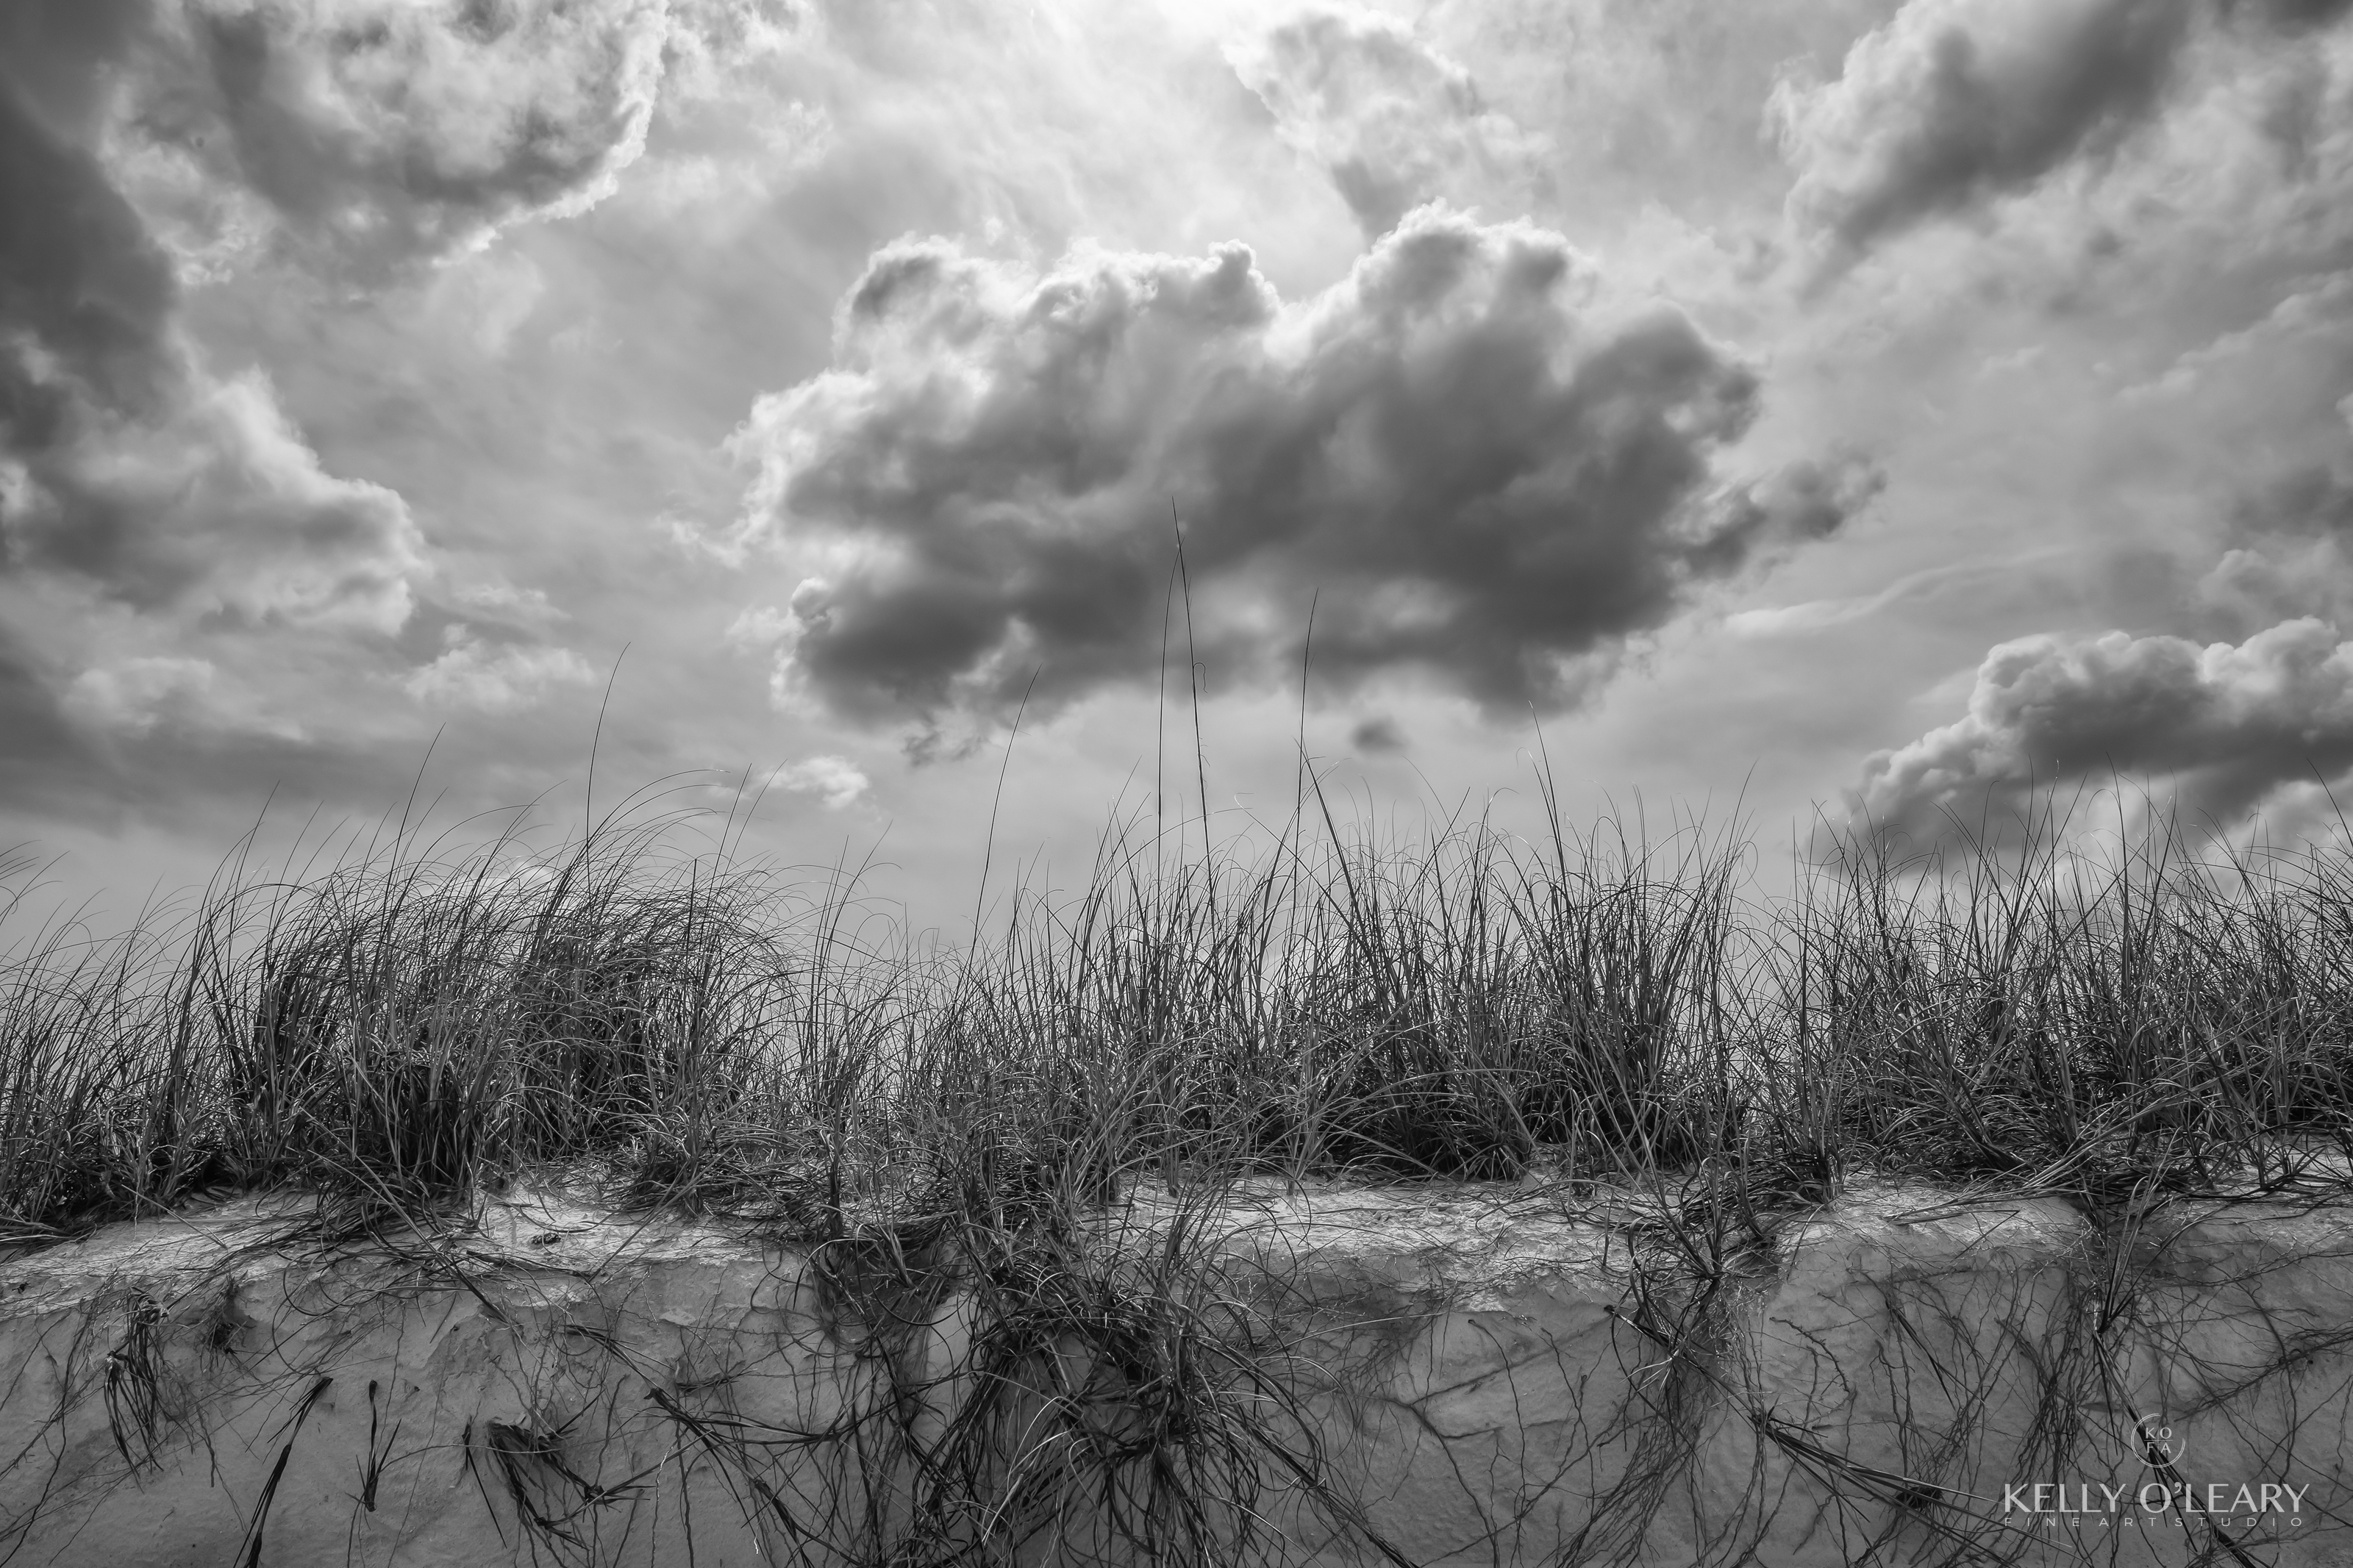 A black and white image titled Stage Lighting photographed by Kelly O'Leary of a backlit cloud over a grassy beach bank. | Photo Title: Stage Lighting | 
        Photo by Kelly O'Leary ©2022